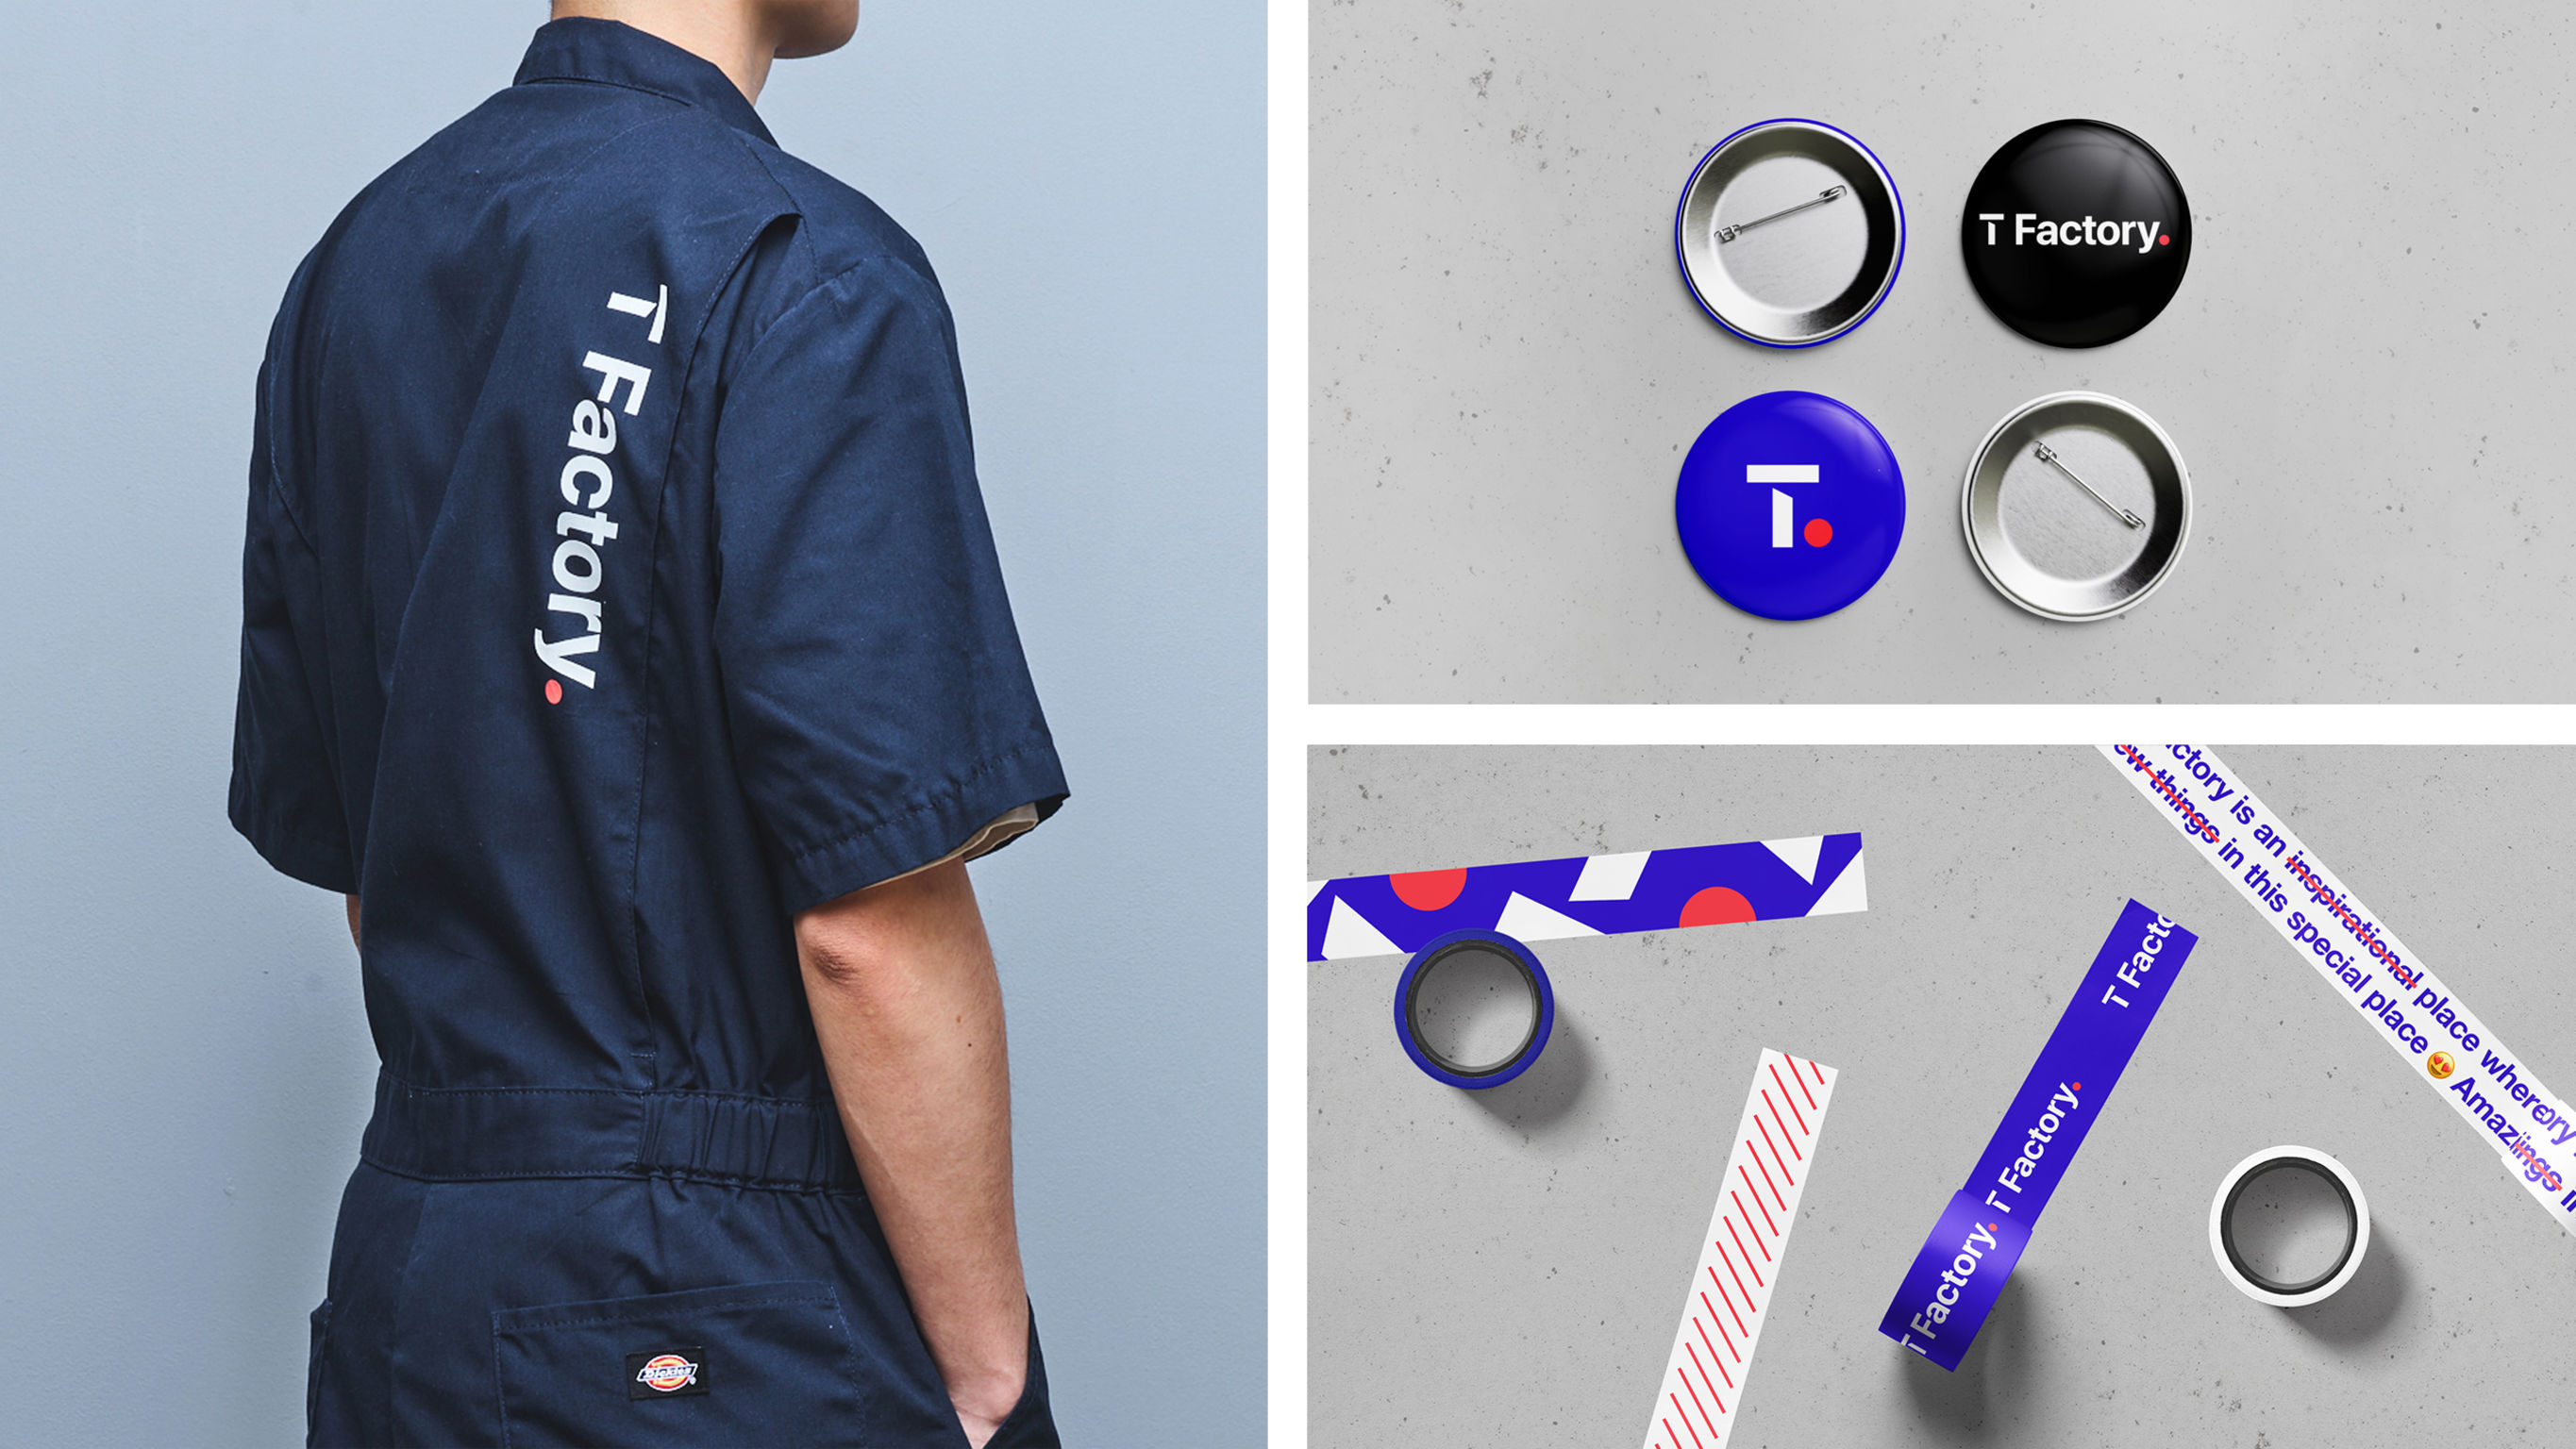 T Factory Brand Experience Design